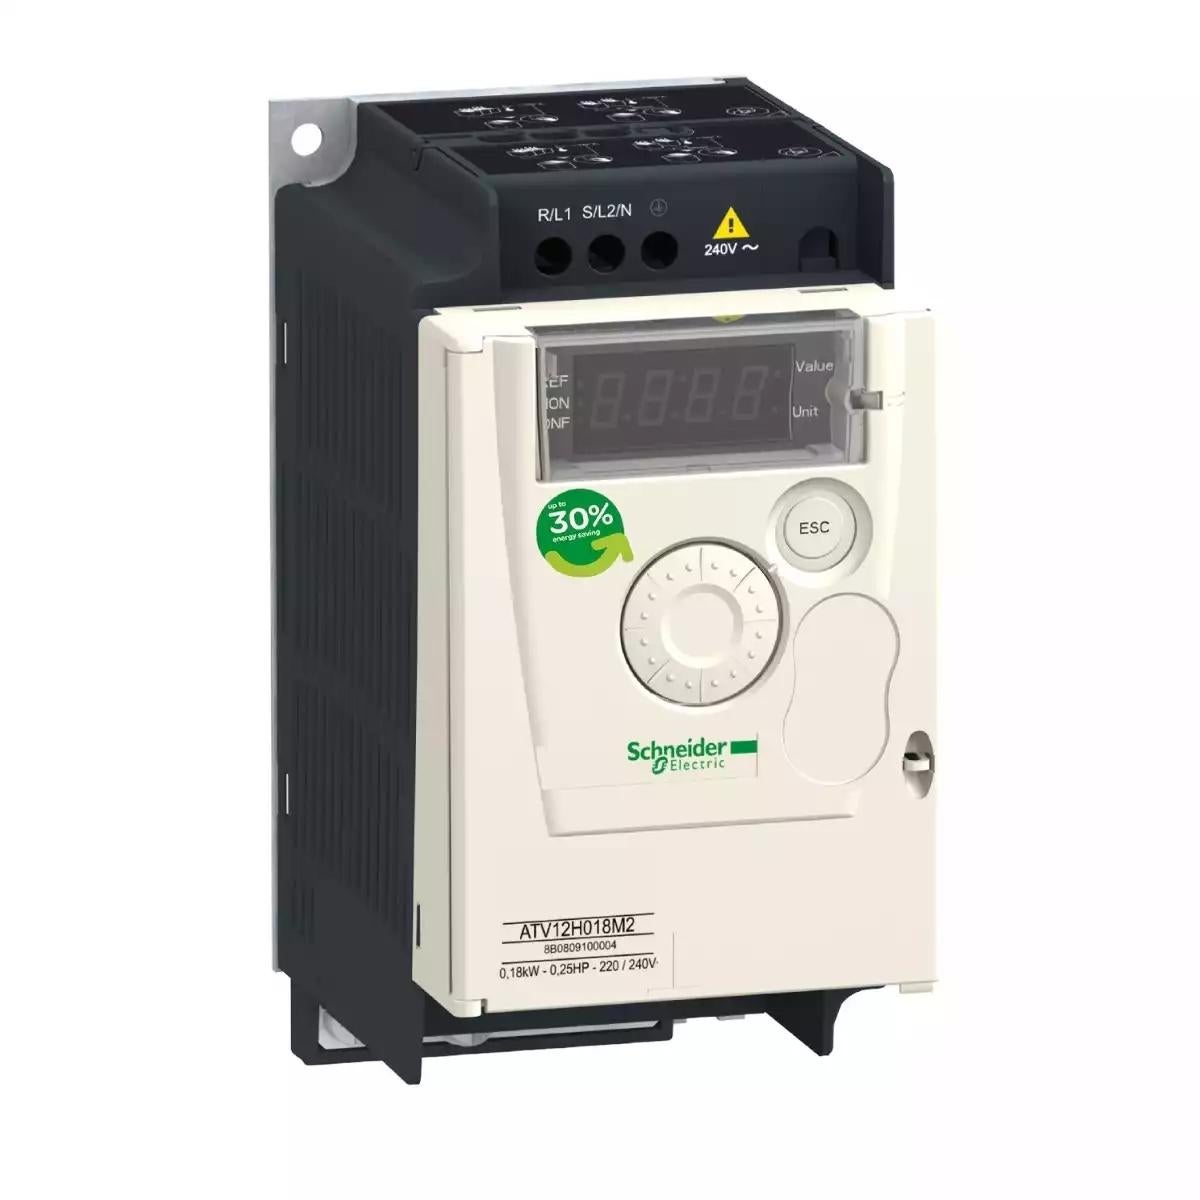 variable speed drive, Altivar 12, 0.18kW, 0.25hp, 200 to 240V, 3 phases